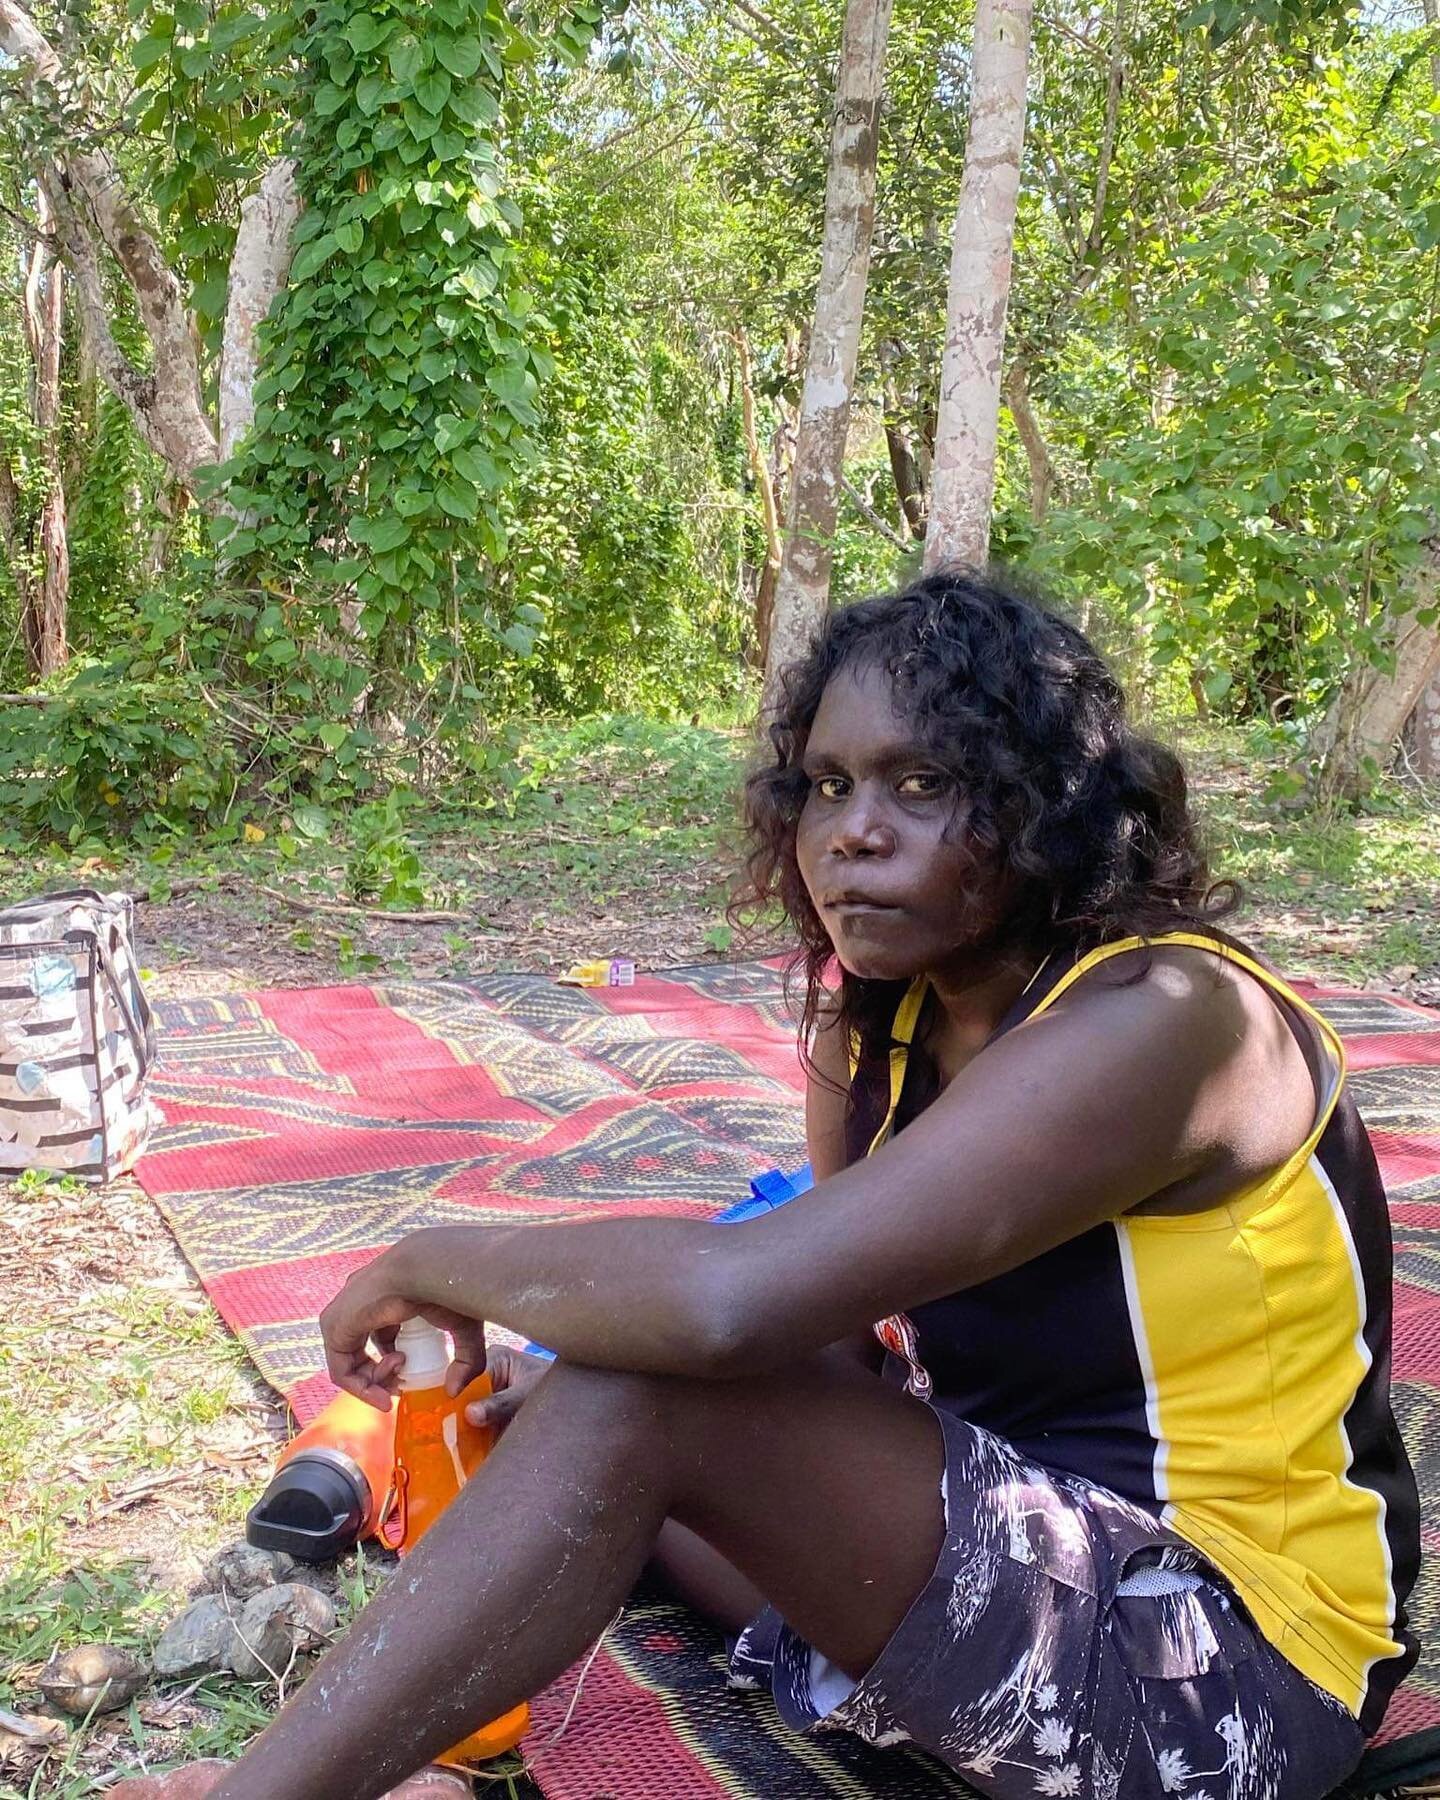 🌴 On Friday for Tiwi Friday the students travelled to Jessie River and learned how to hunt for jukwarringa (mud mussel) and piranga (long bum). 

🌴 Afterwards was a swim, fire and feed at the Picka creek where Bernard spoke about the Tiwi seasons a